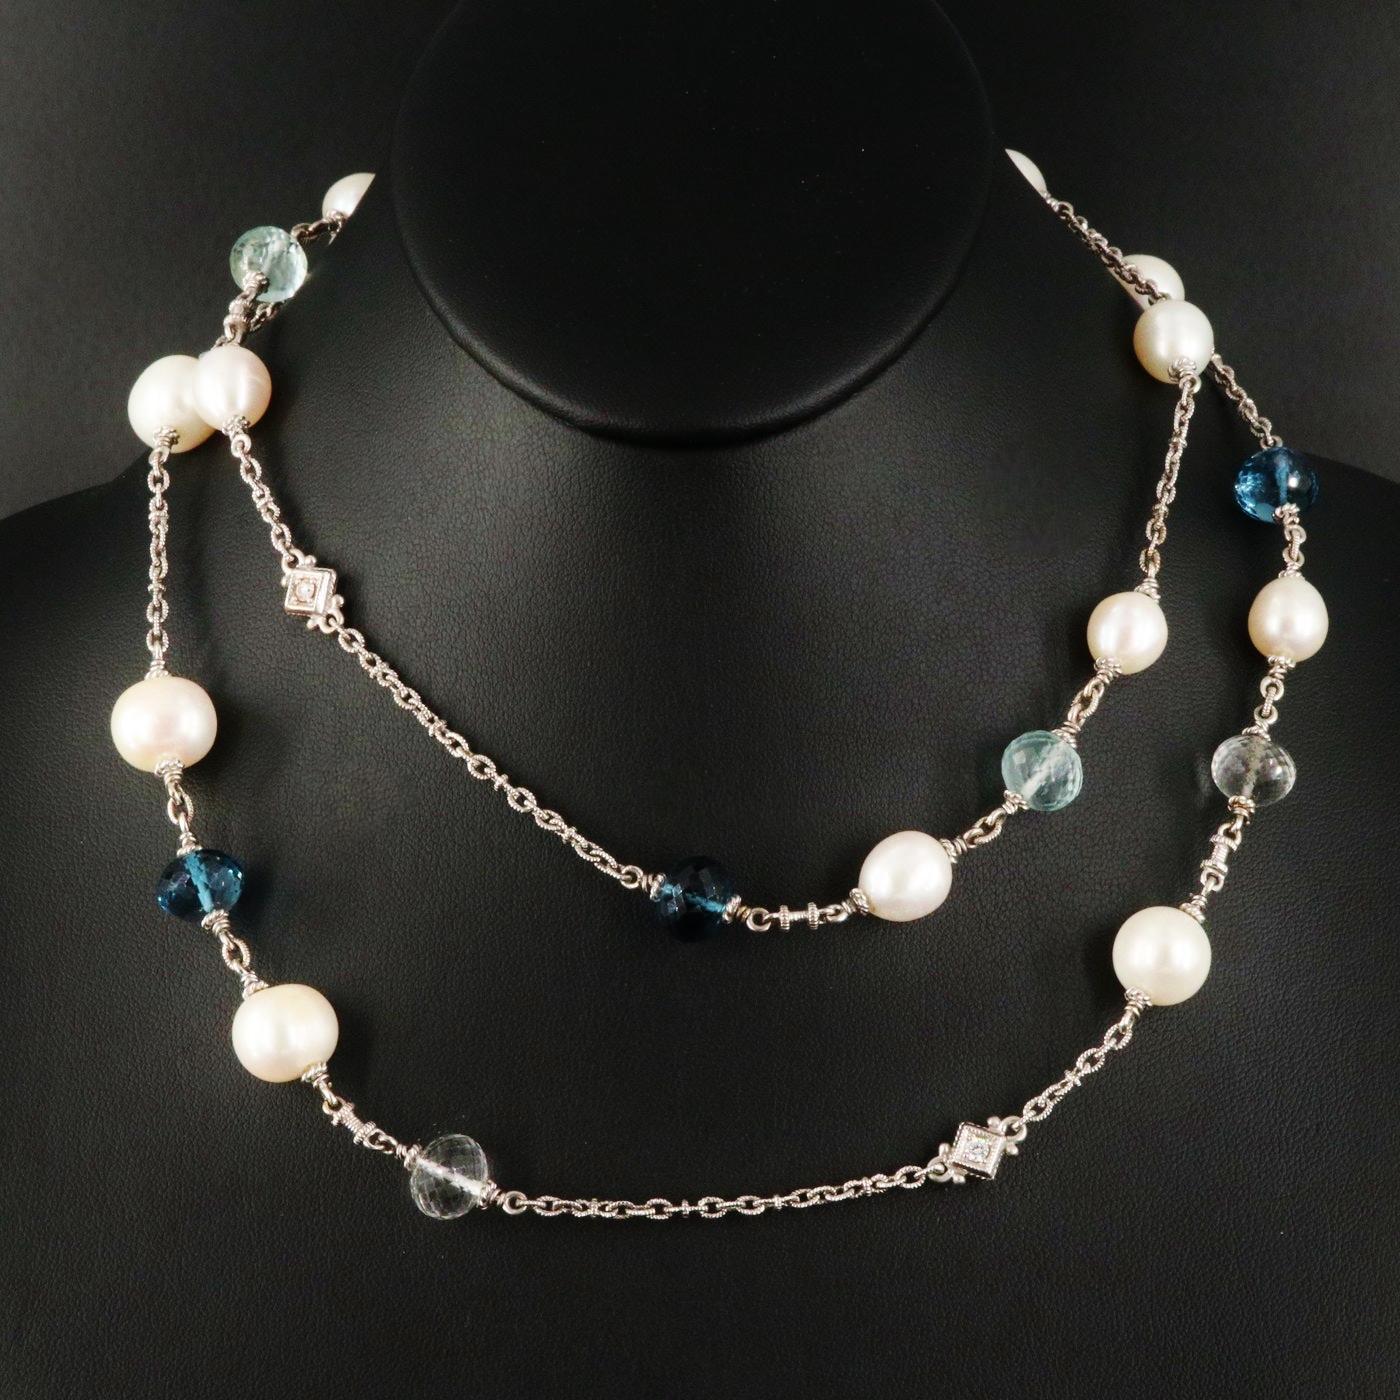 Designer Judith Ripka Necklace (stamped with the designer hallmarks)

Bahama Mama collection

NEW with tags, Tag Price $24000

18K solid white gold

Very heavy and well made, 63 grams in weight 

Top Quality Diamond, Gemstone and Pearls, top